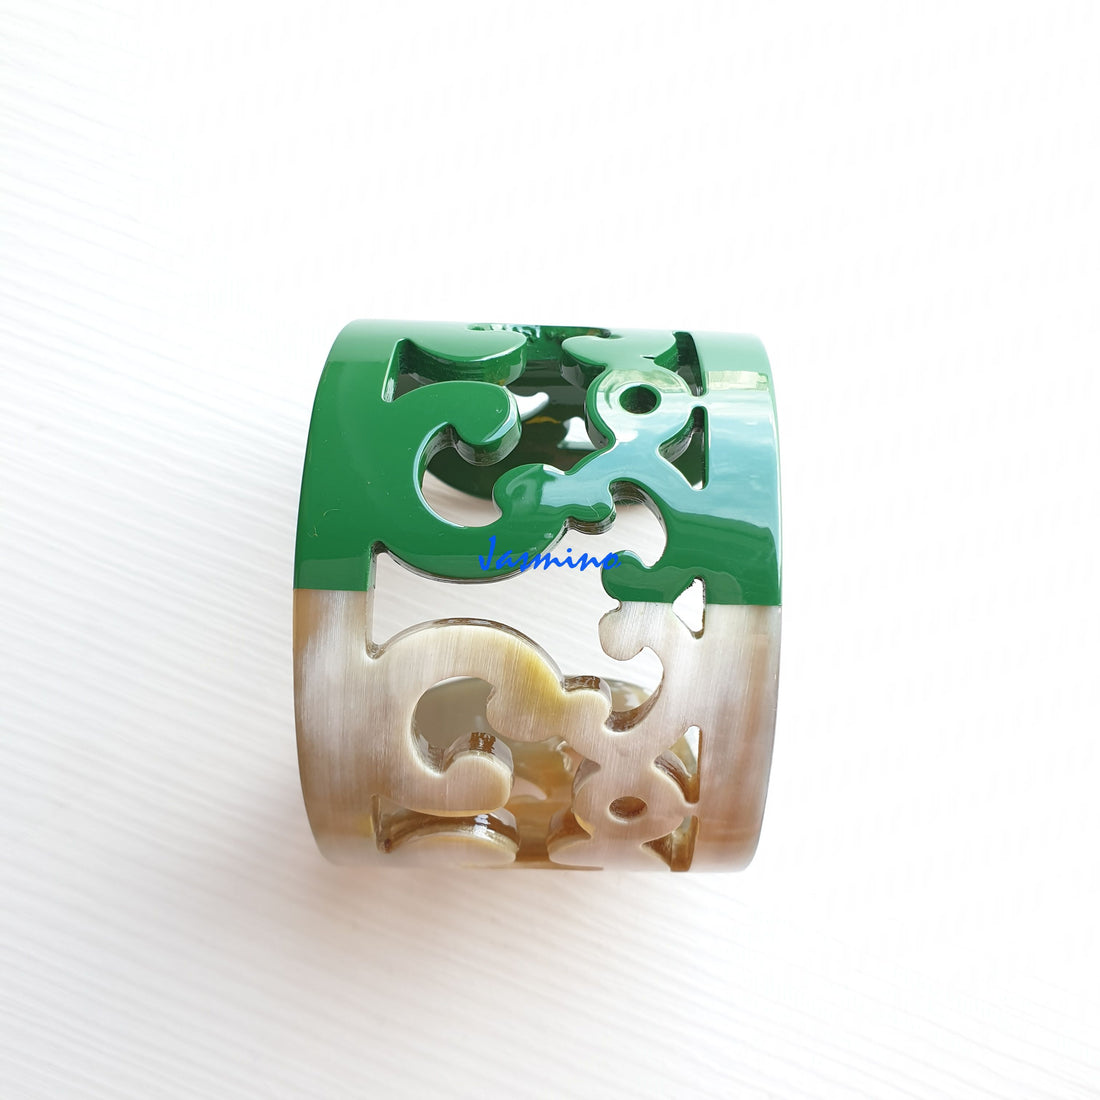 A handmade cuff bracelet is designed exquisitely with a green color on a white background 